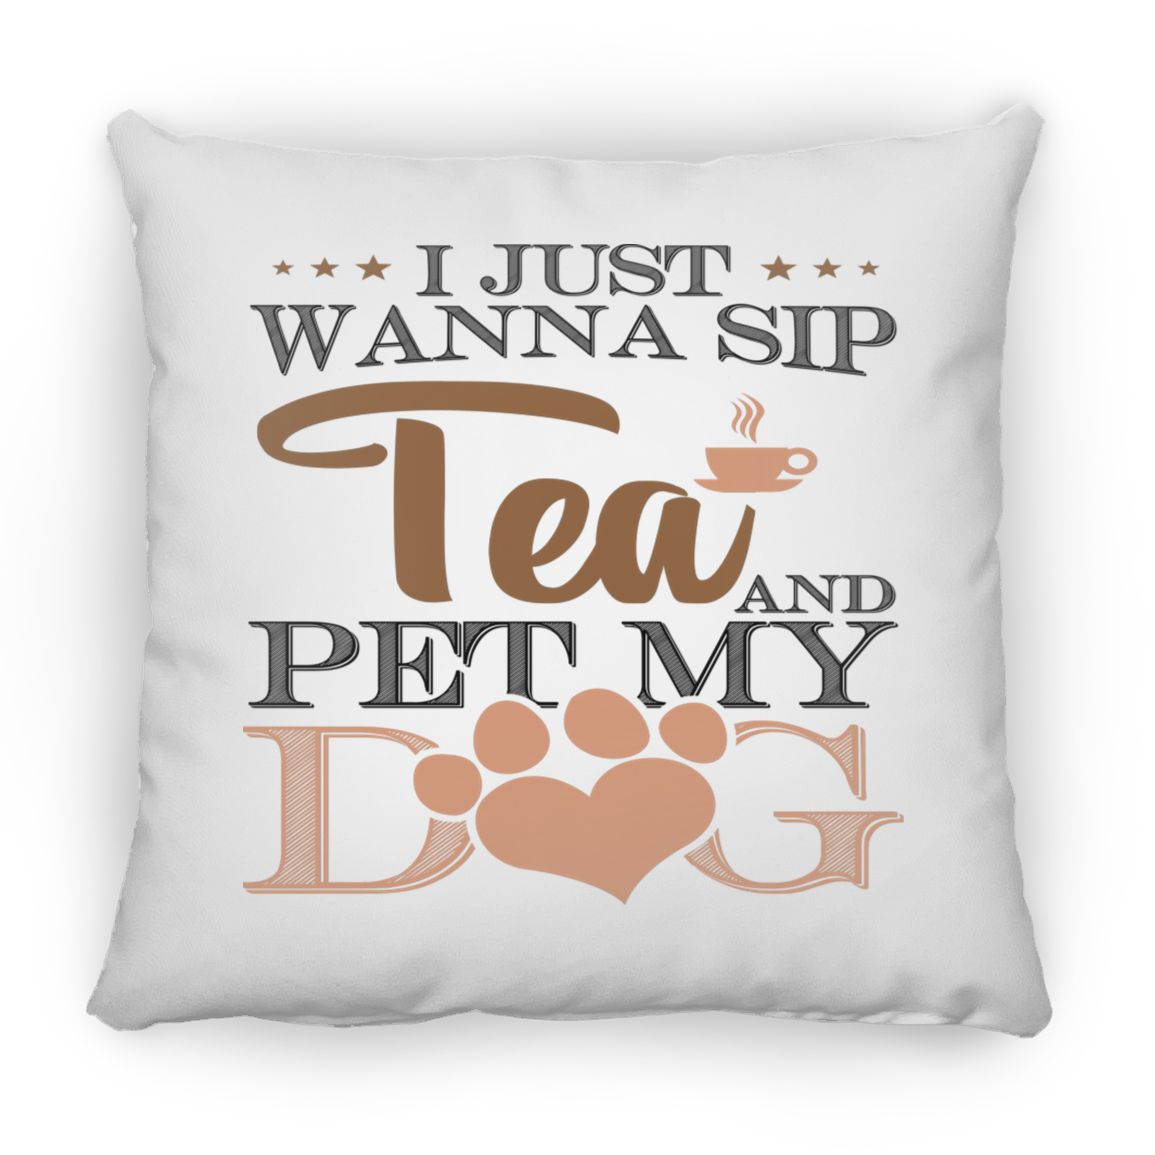 Tea and Dog - Large Square Pillow